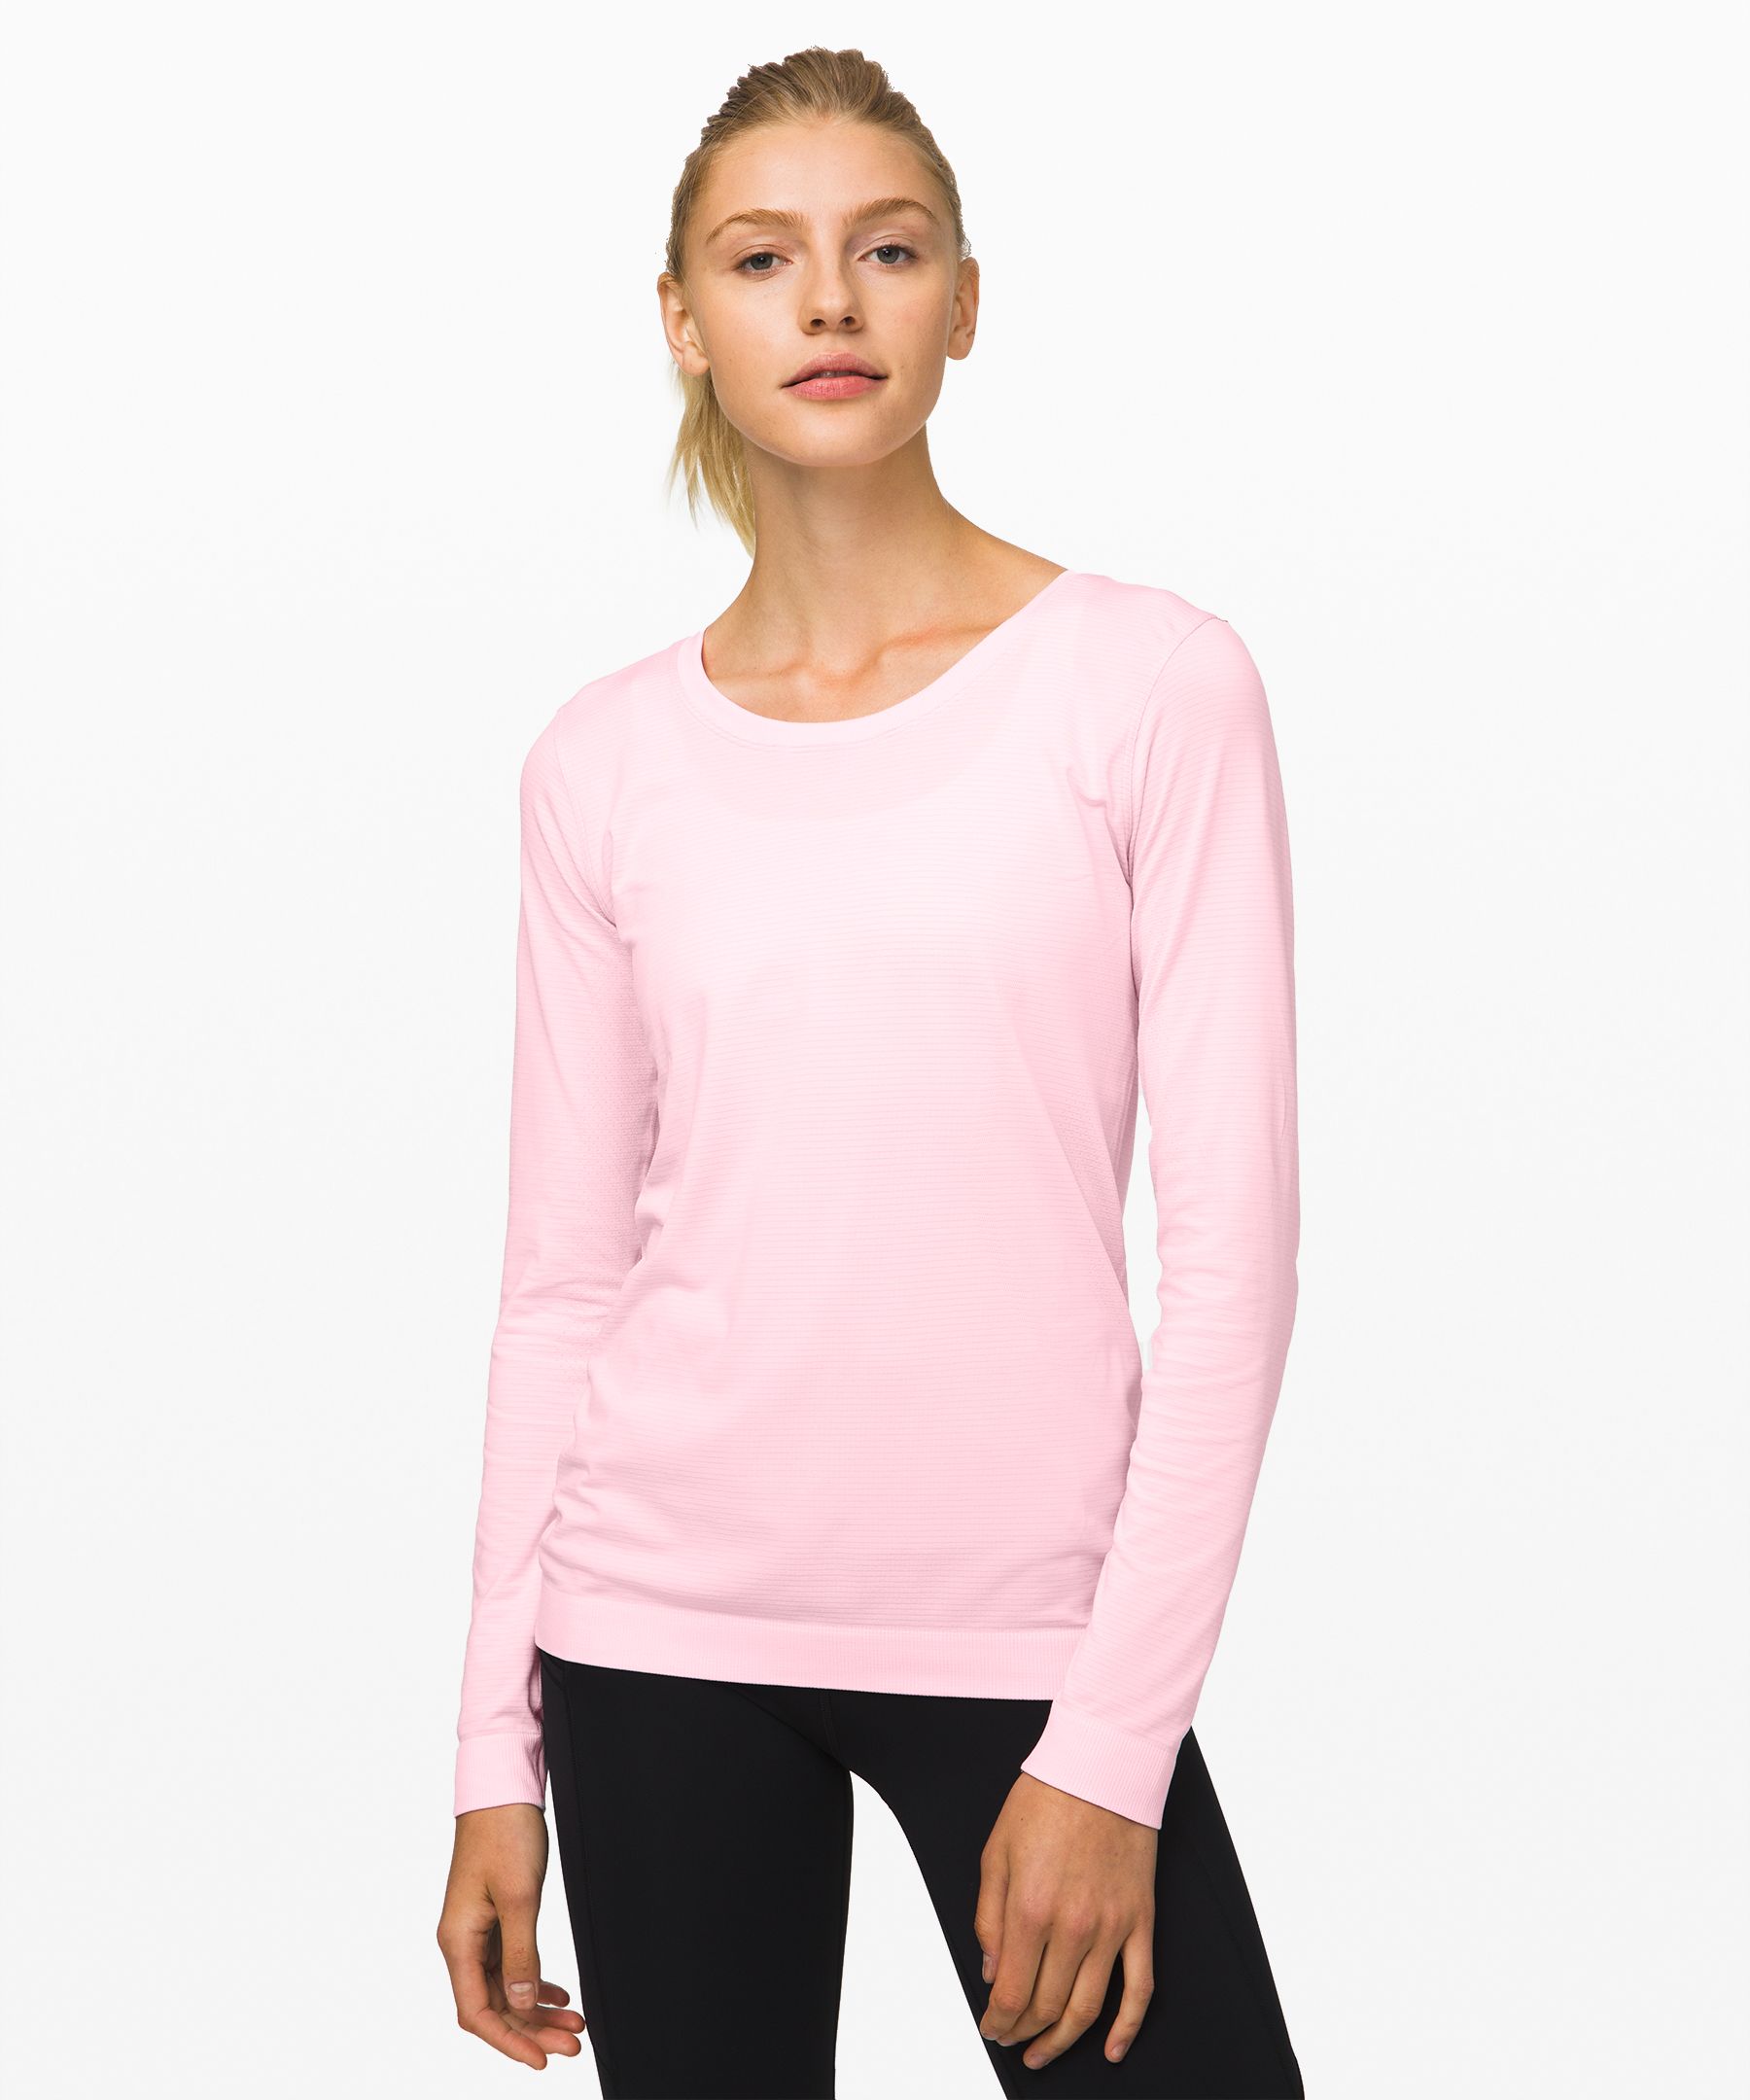 Lululemon Swiftly Relaxed Long Sleeve In Powdered Rose/powdered Rose